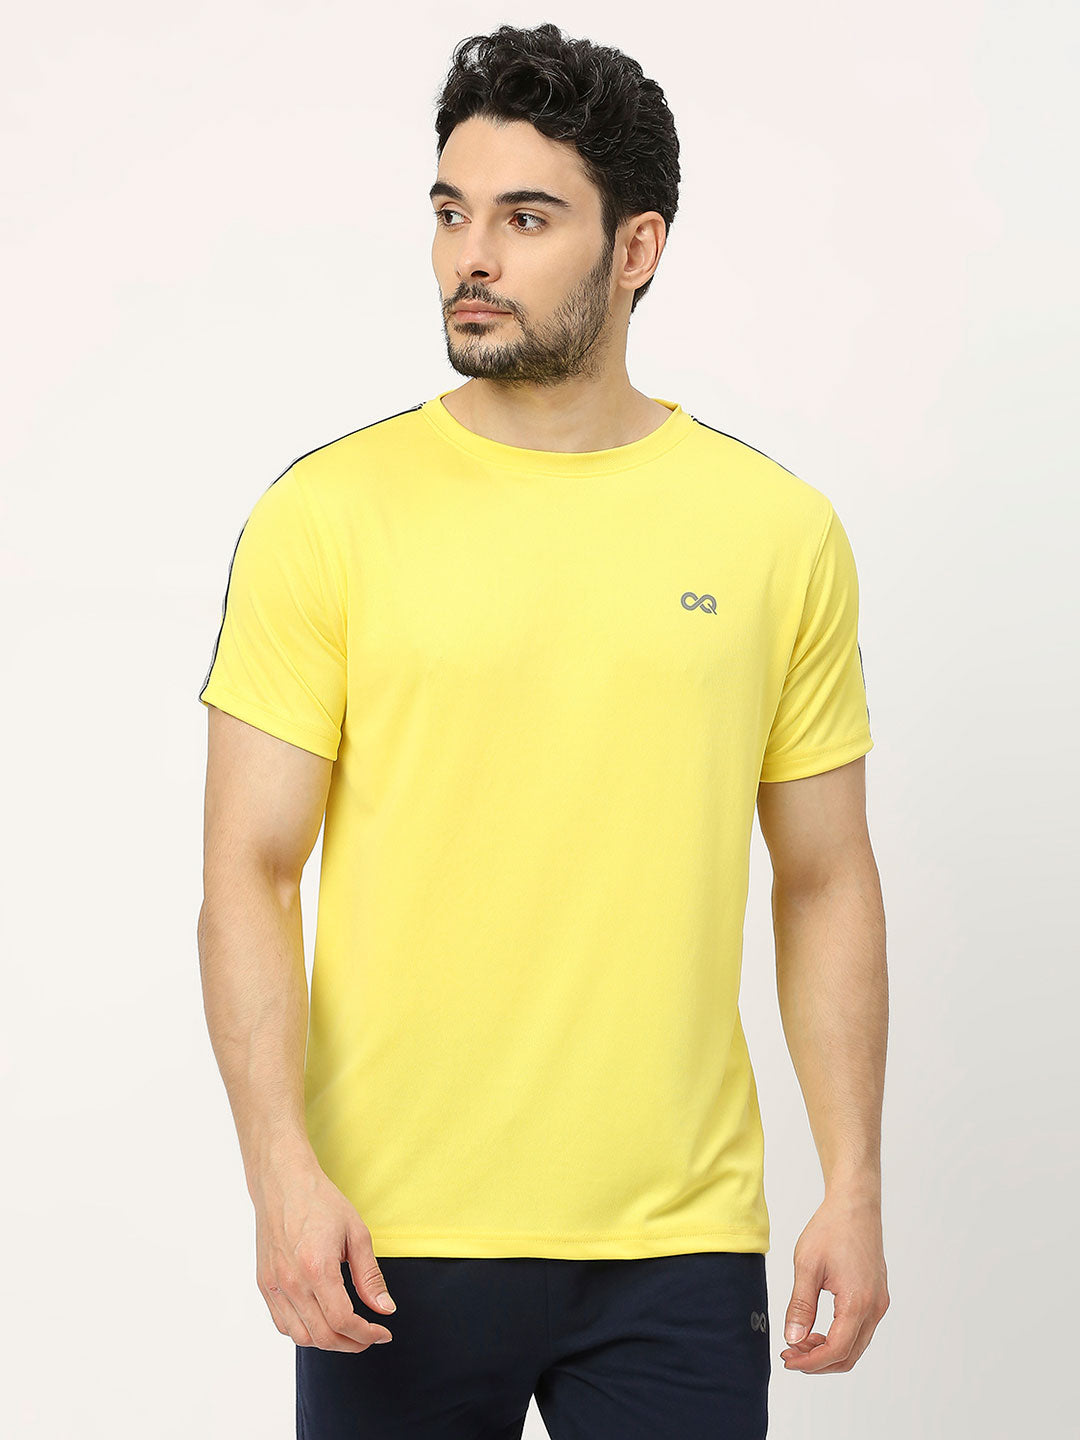 Shop Men's Yellow Striped Sports T-Shirt - Stay Cool and Stylish